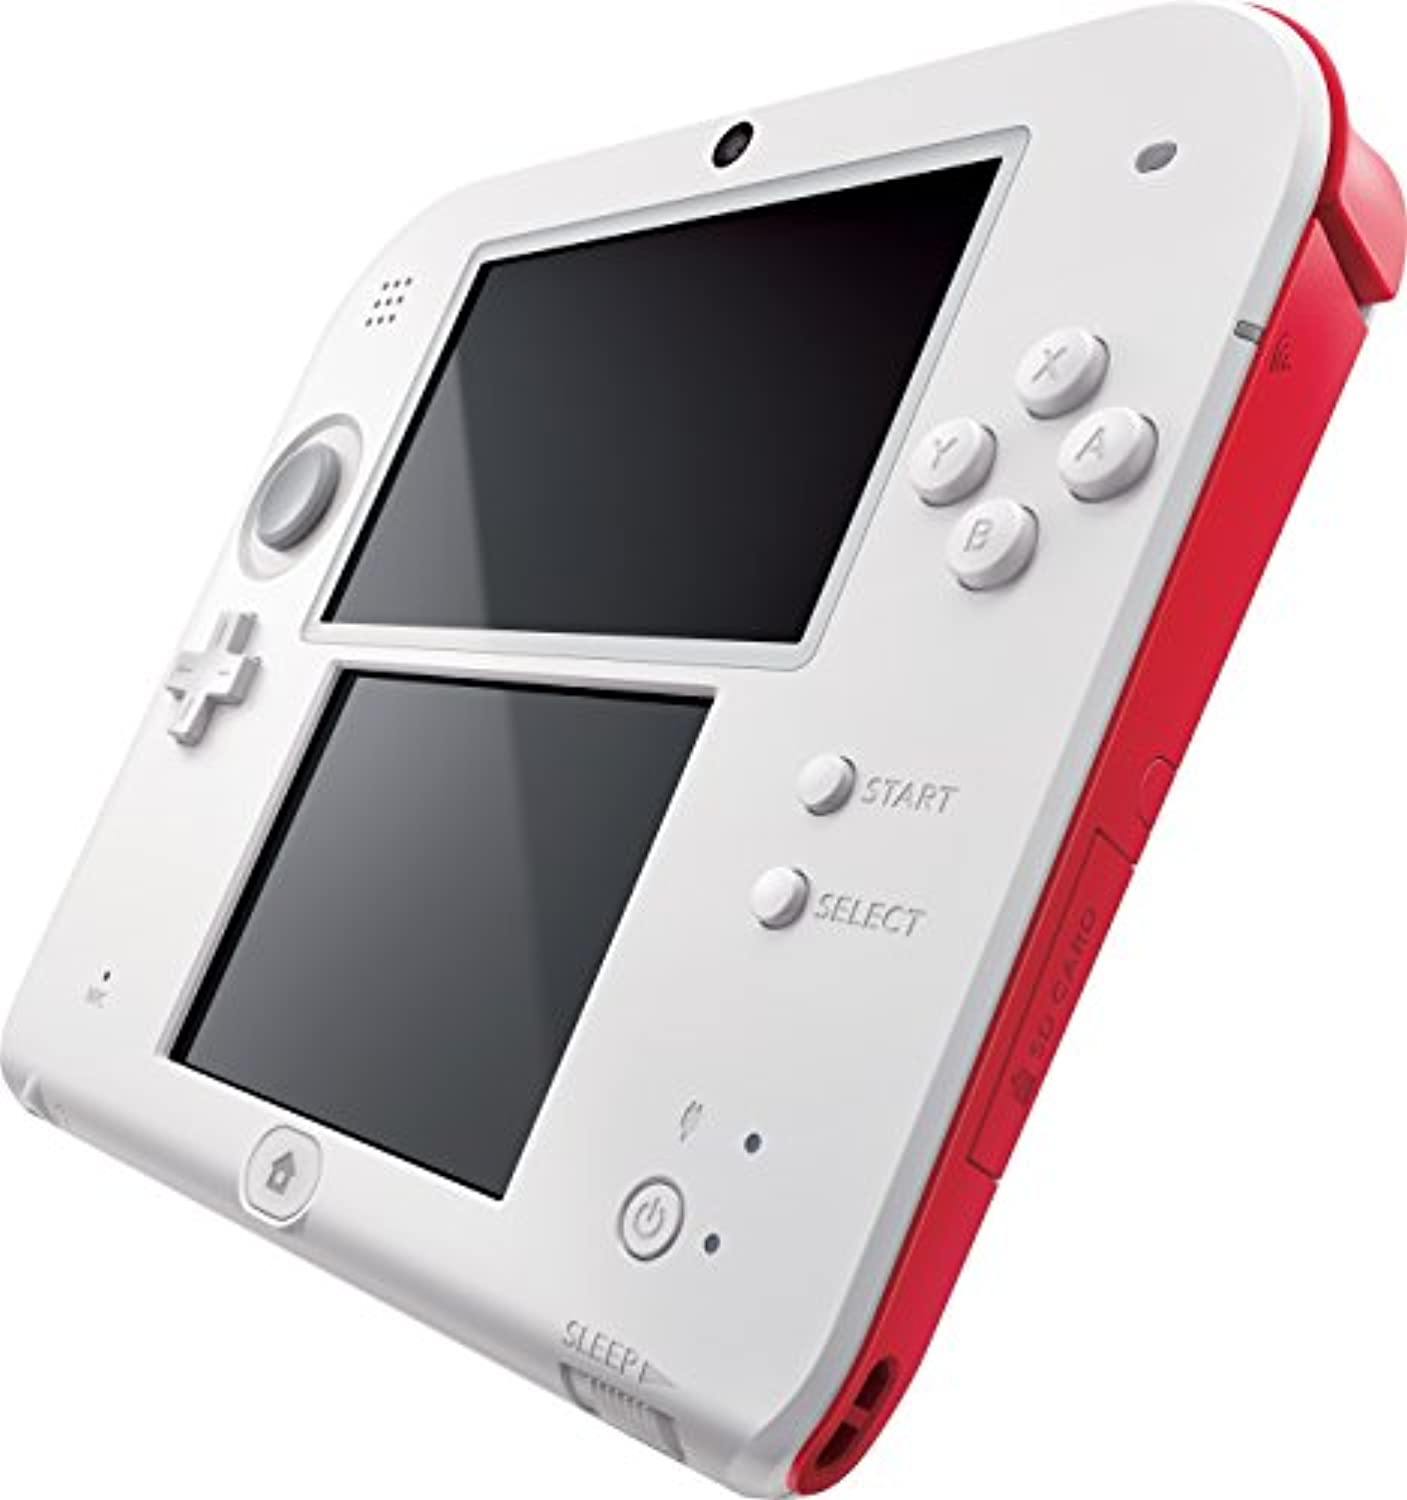 Nintendo Handheld Console 2DS - White/Red (USED) - Offer Games